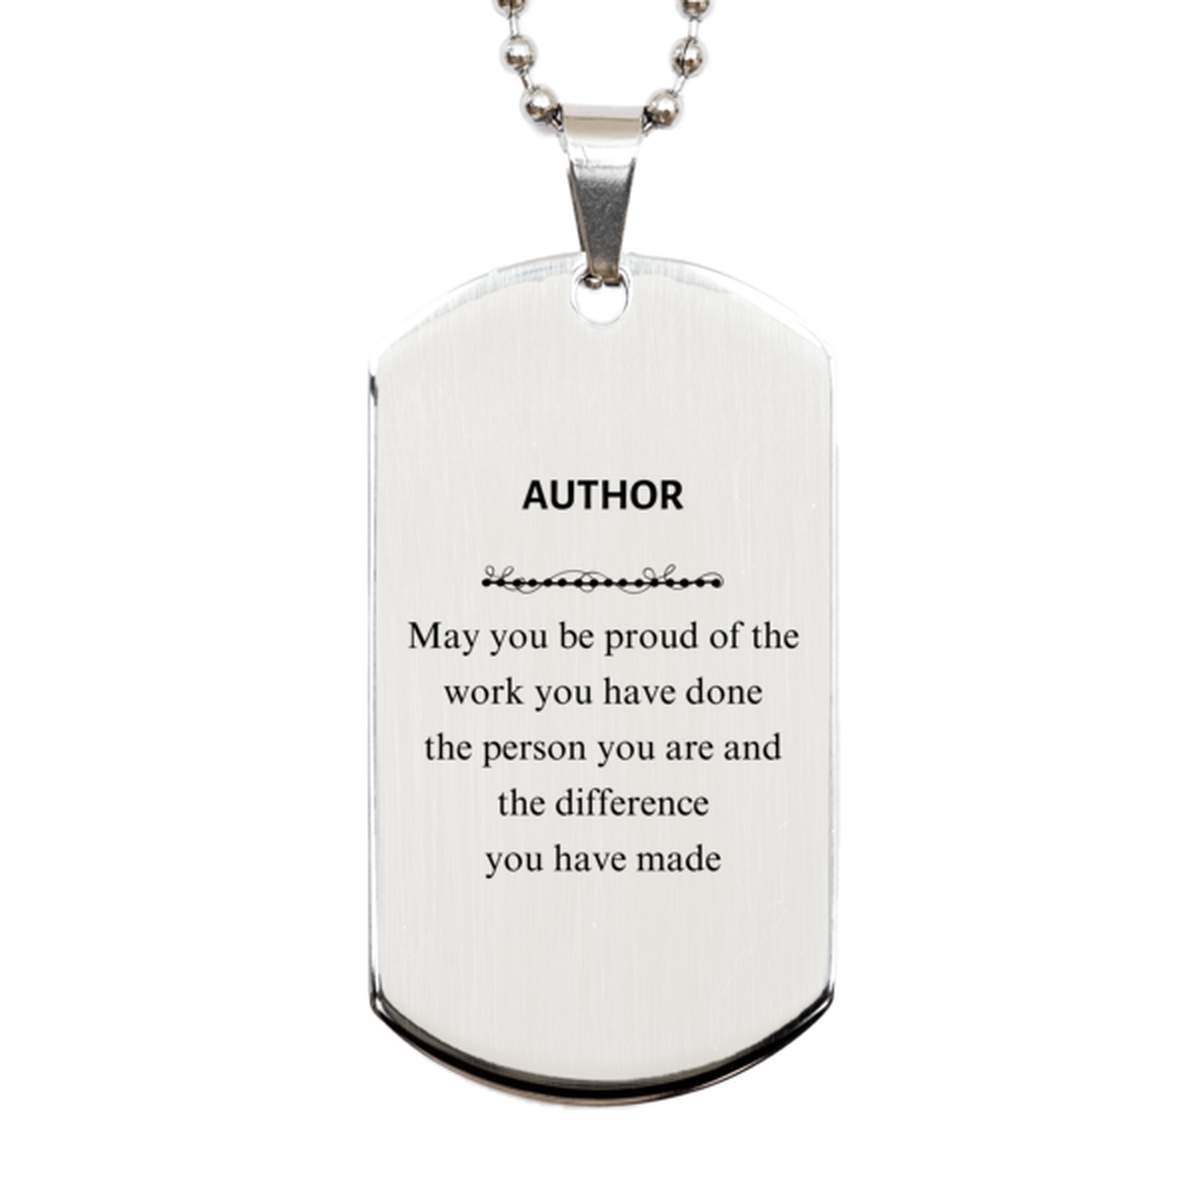 Author May you be proud of the work you have done, Retirement Author Silver Dog Tag for Colleague Appreciation Gifts Amazing for Author